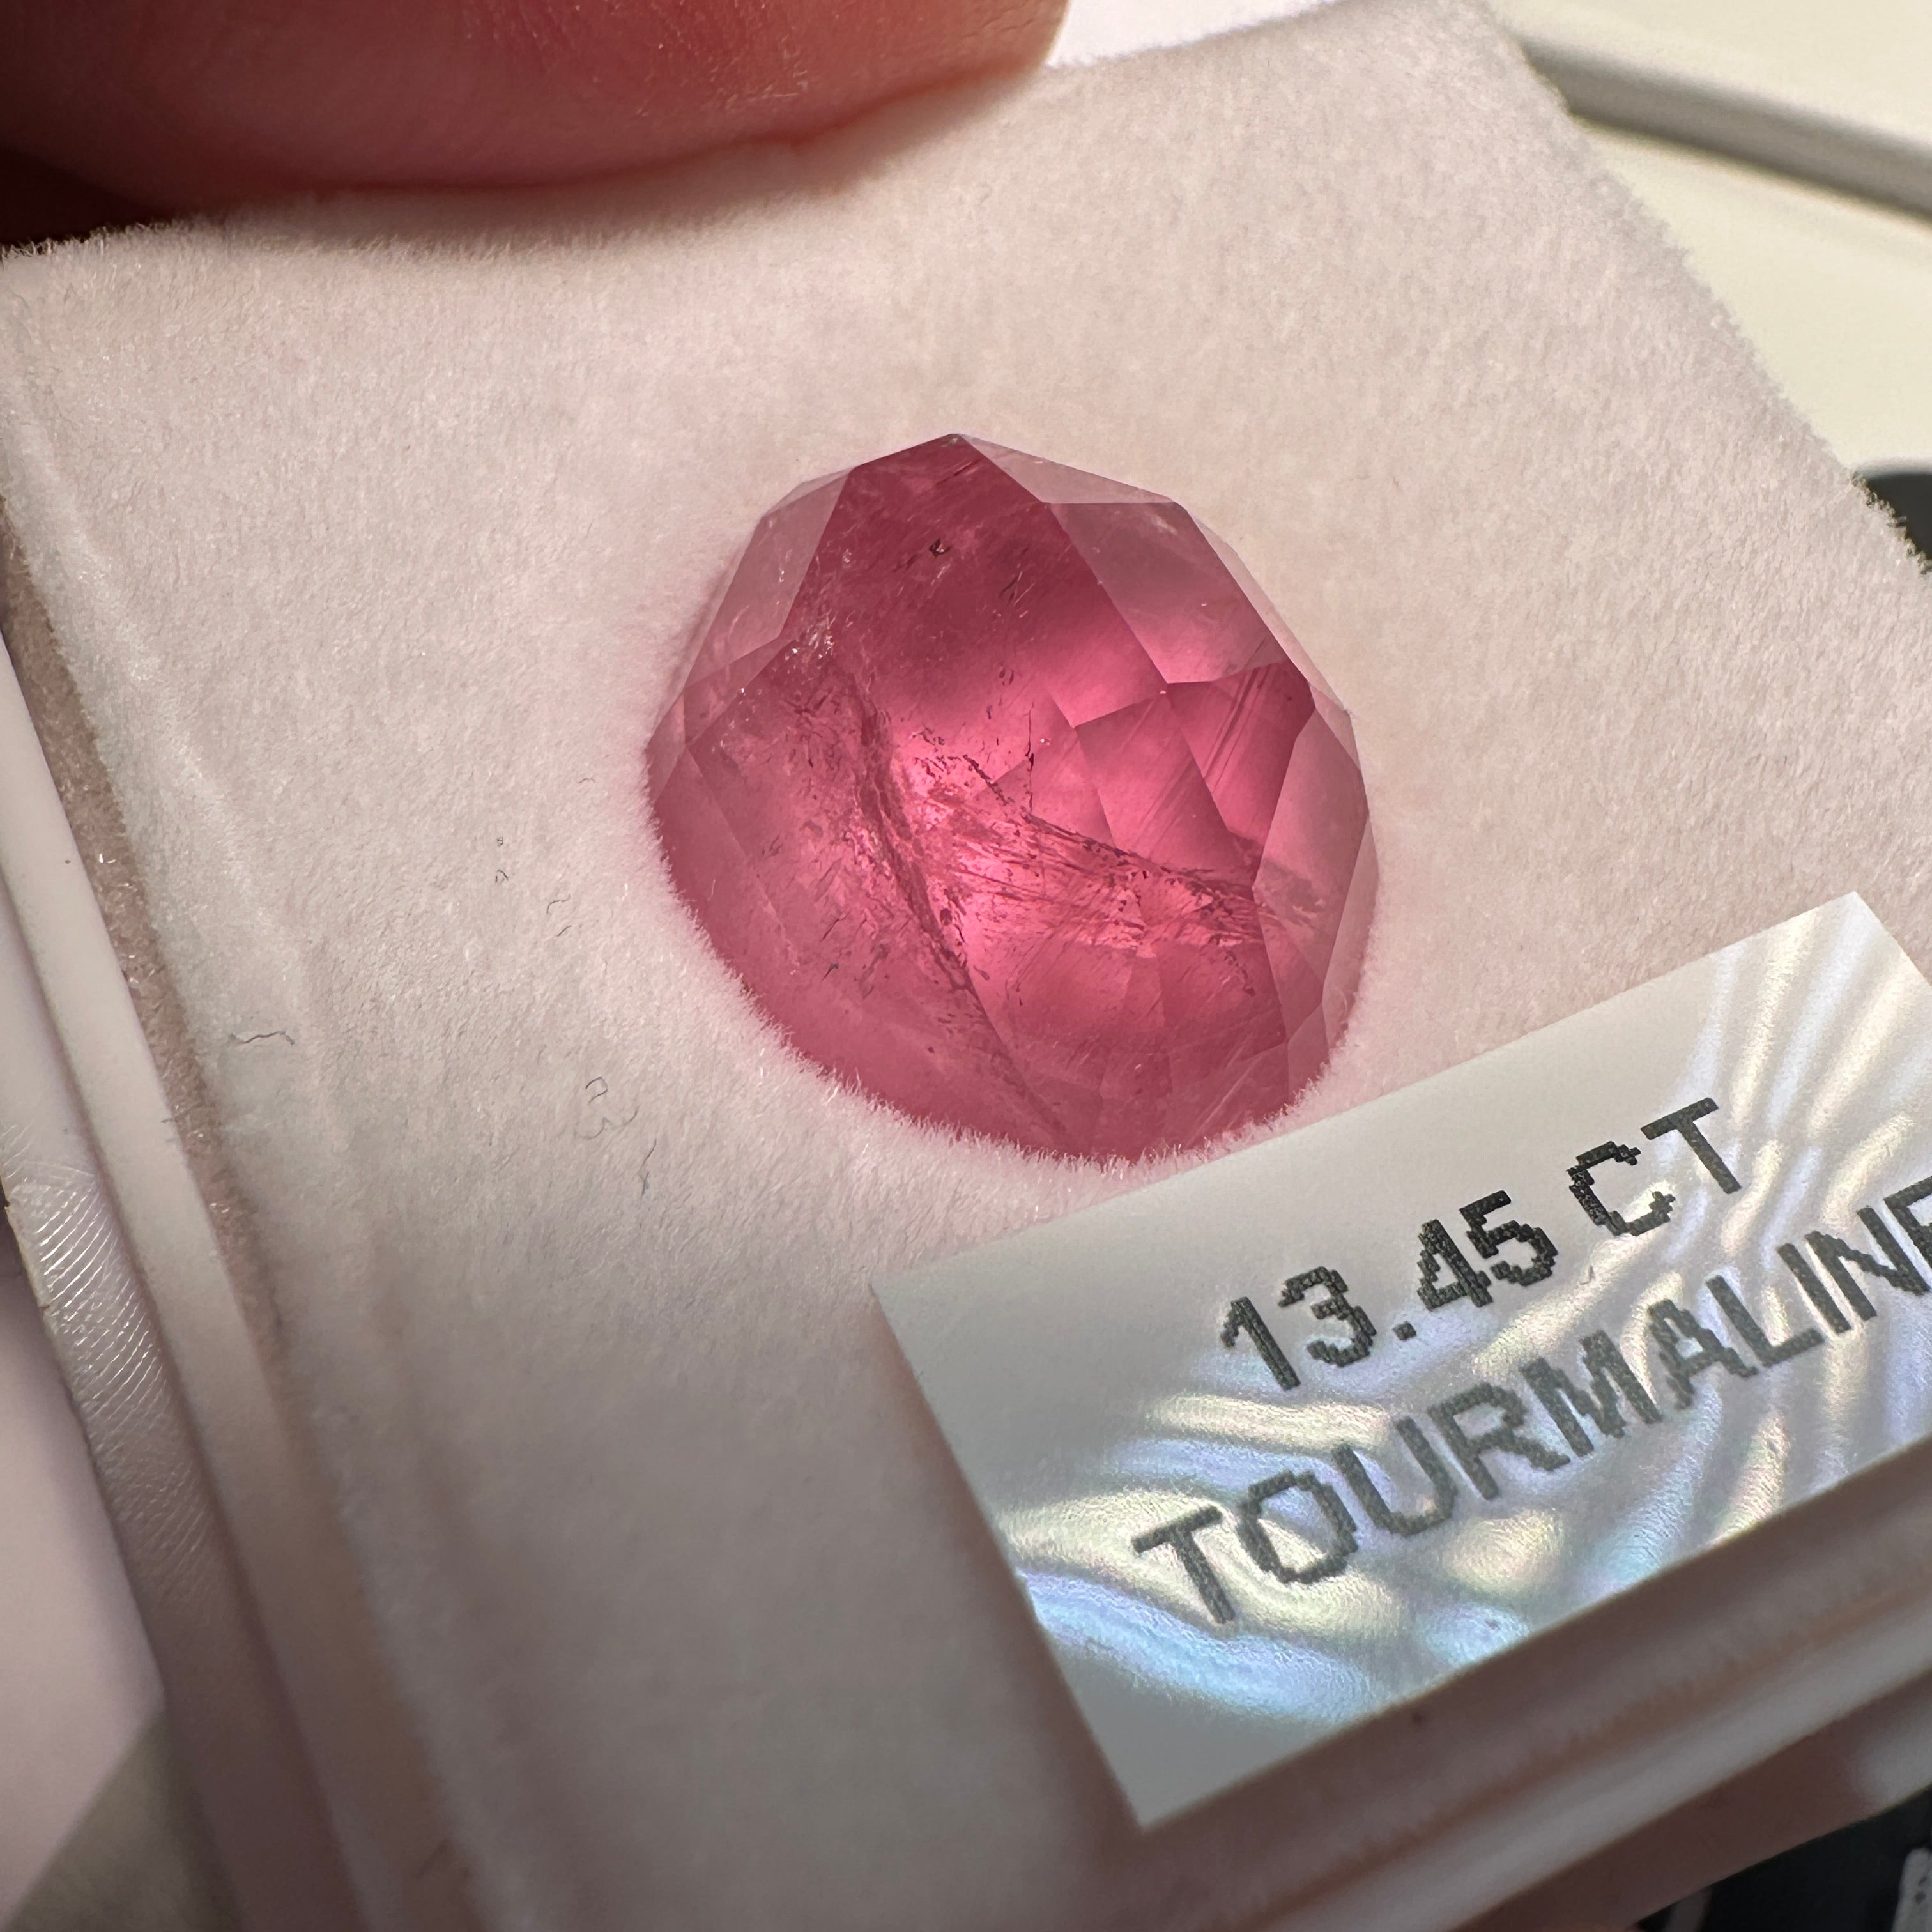 13.45ct Congo Tourmaline, Untreated Unheated, see it in different lights